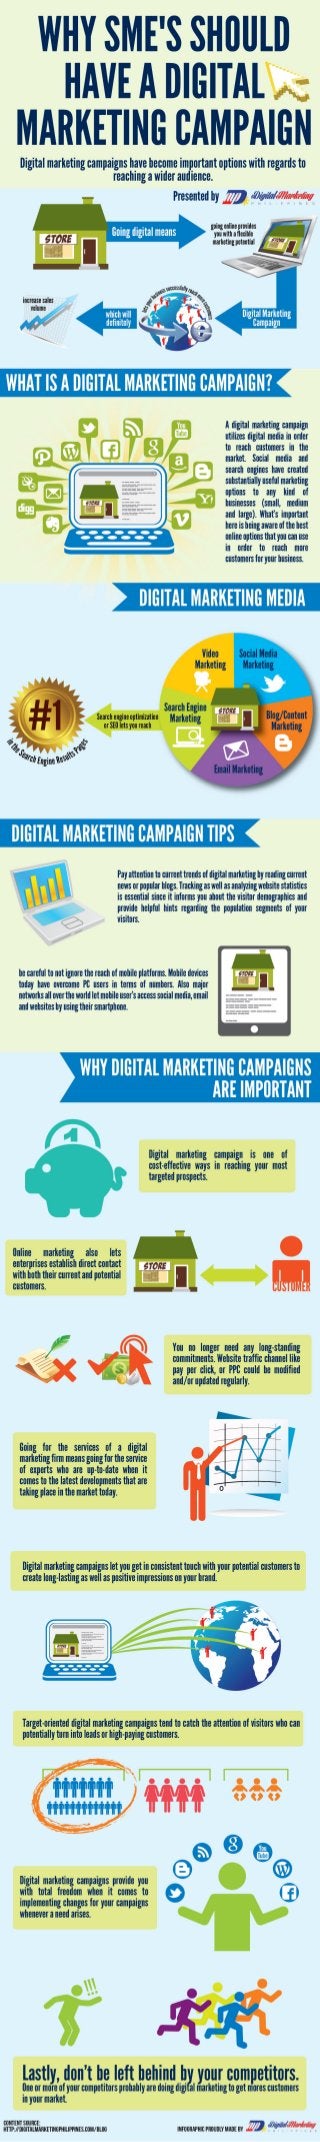 Why SME's (SMB) Should Have A Digital Marketing Campaign?